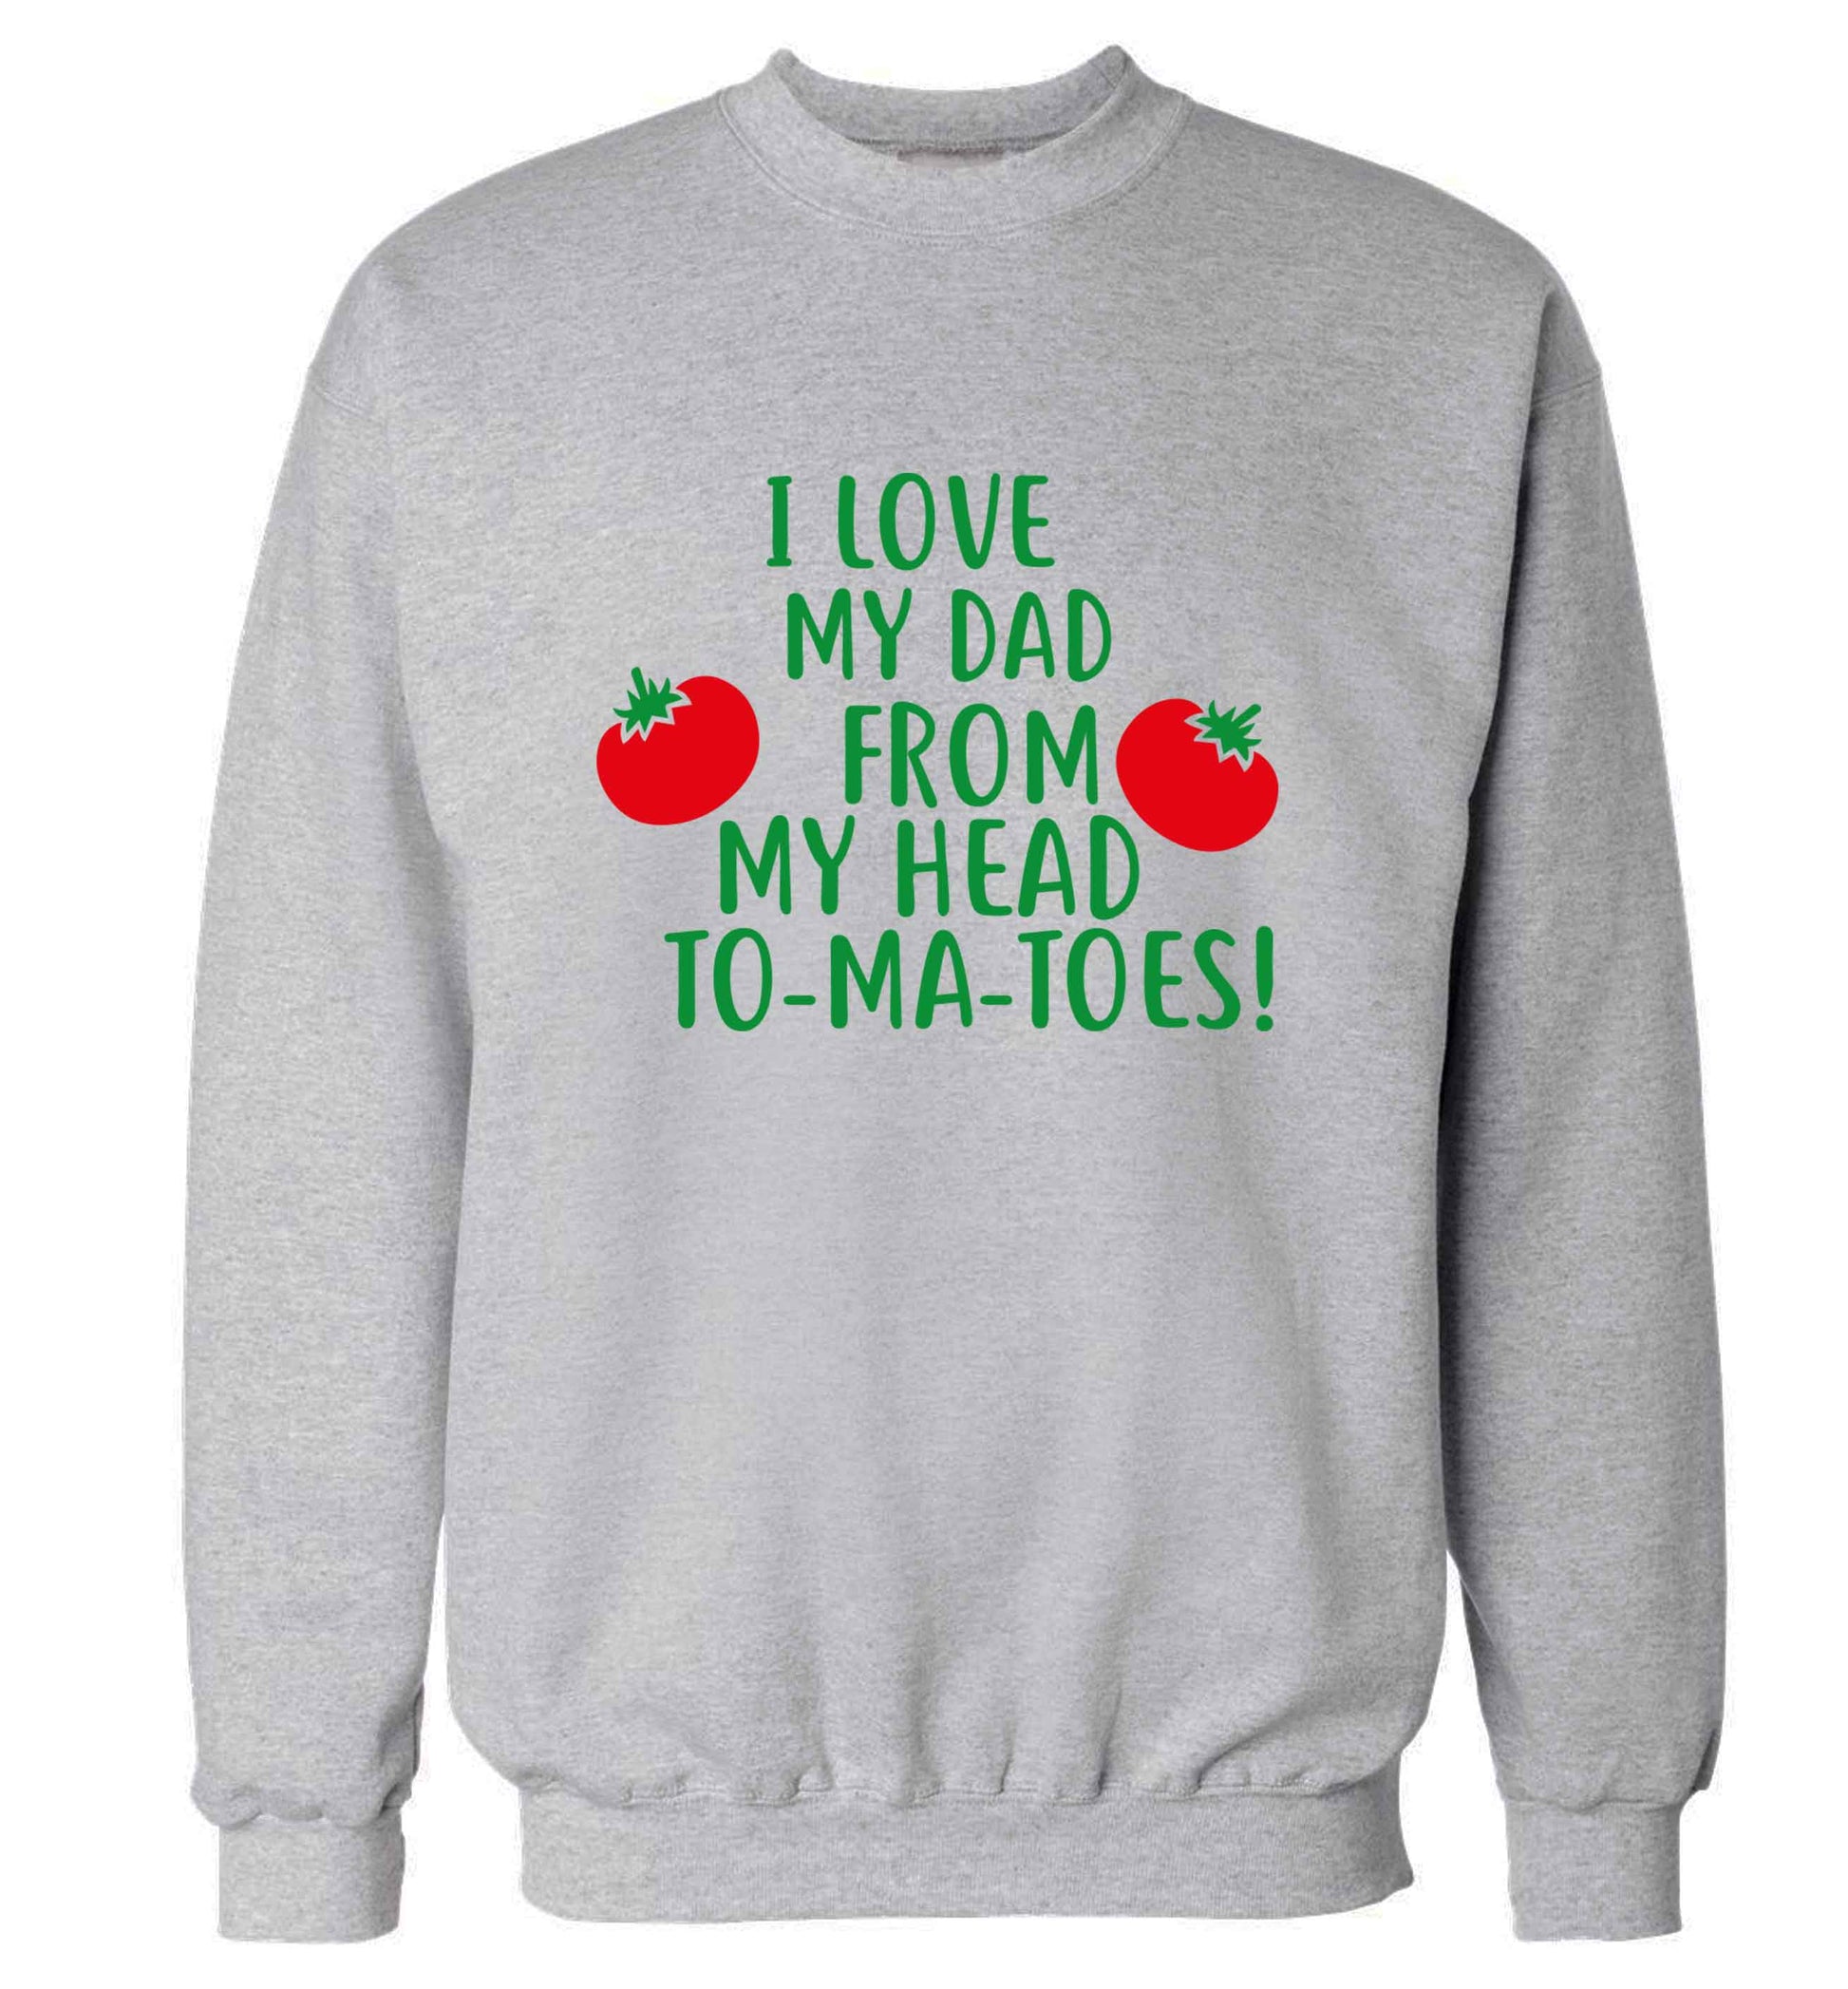 I love my dad from my head to-ma-toes adult's unisex grey sweater 2XL